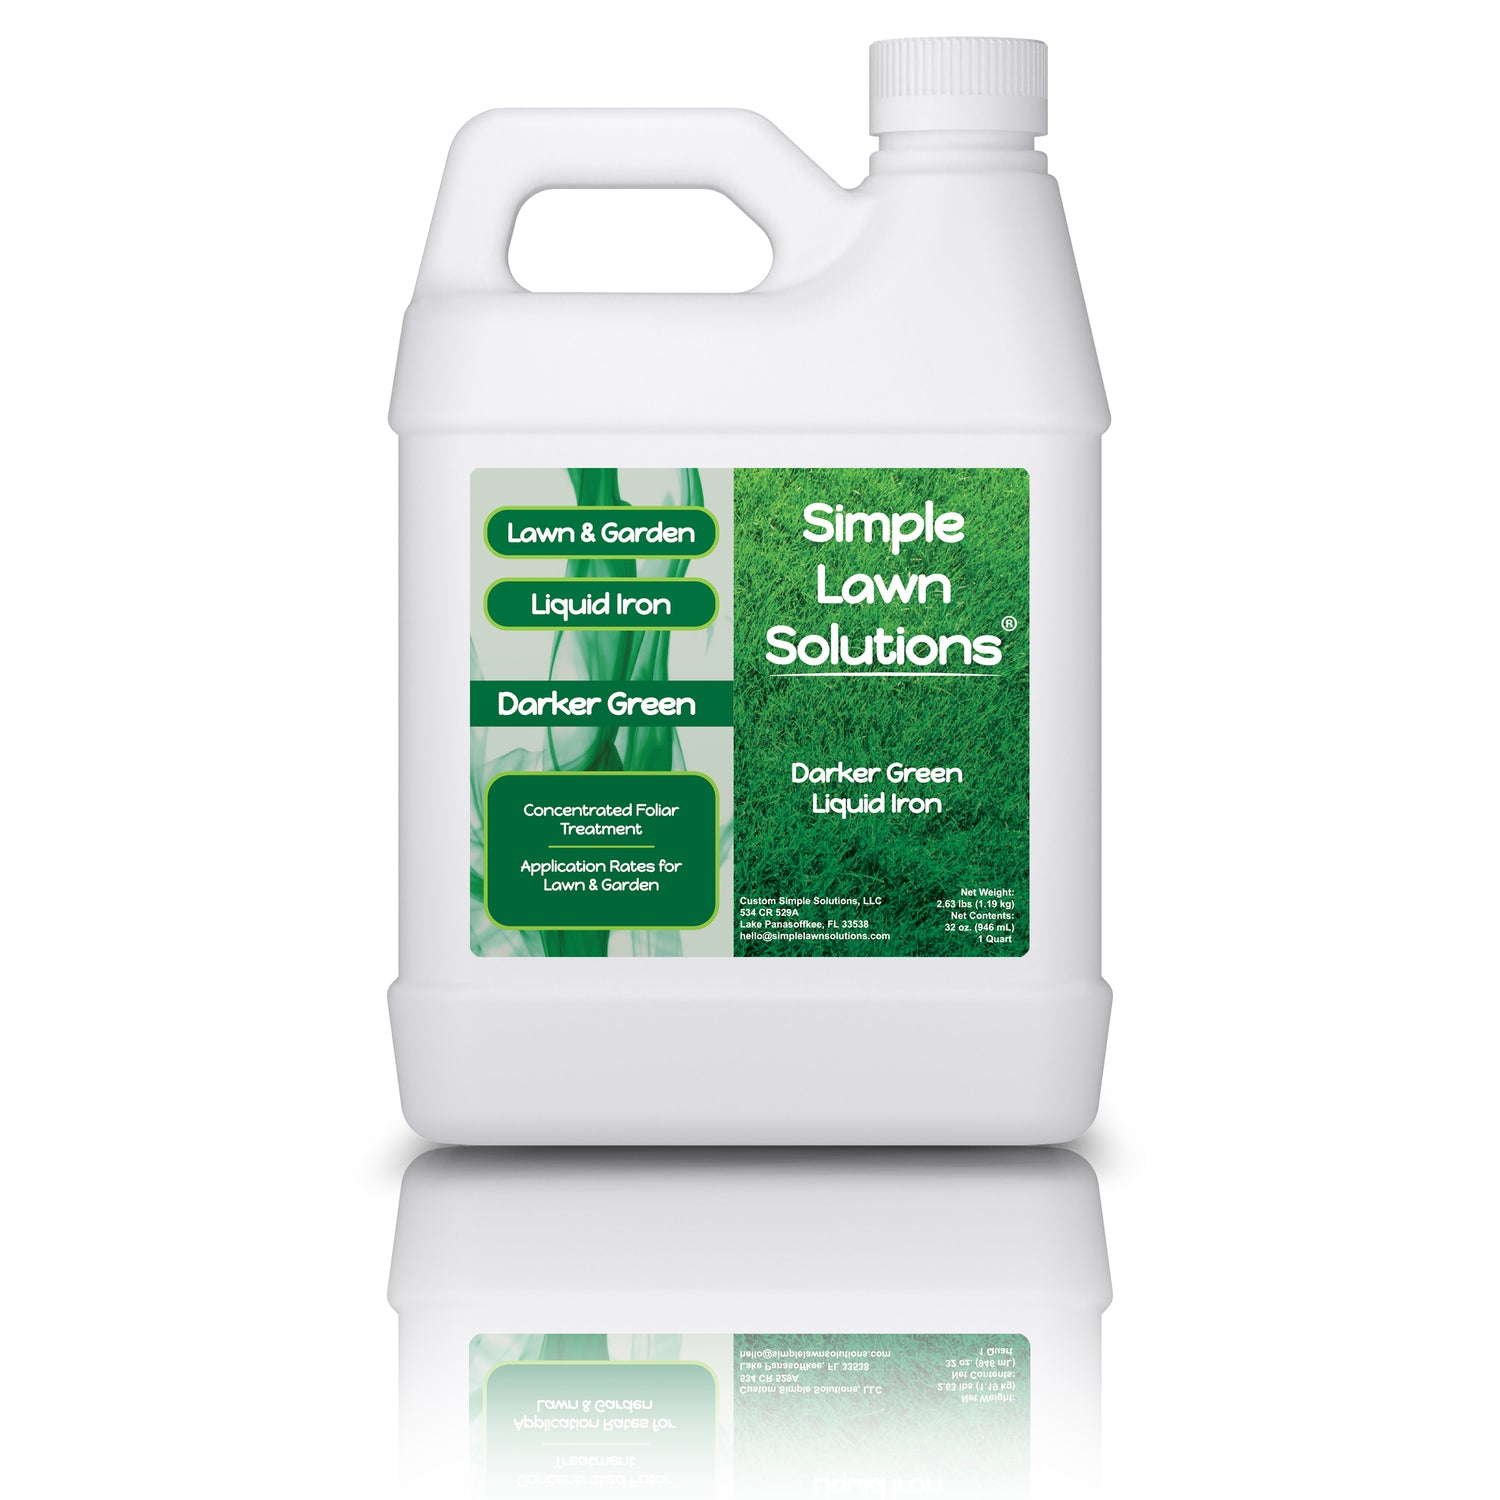 Darker Green Liquid Iron (32 Ounces) by Simple Lawn Solutions